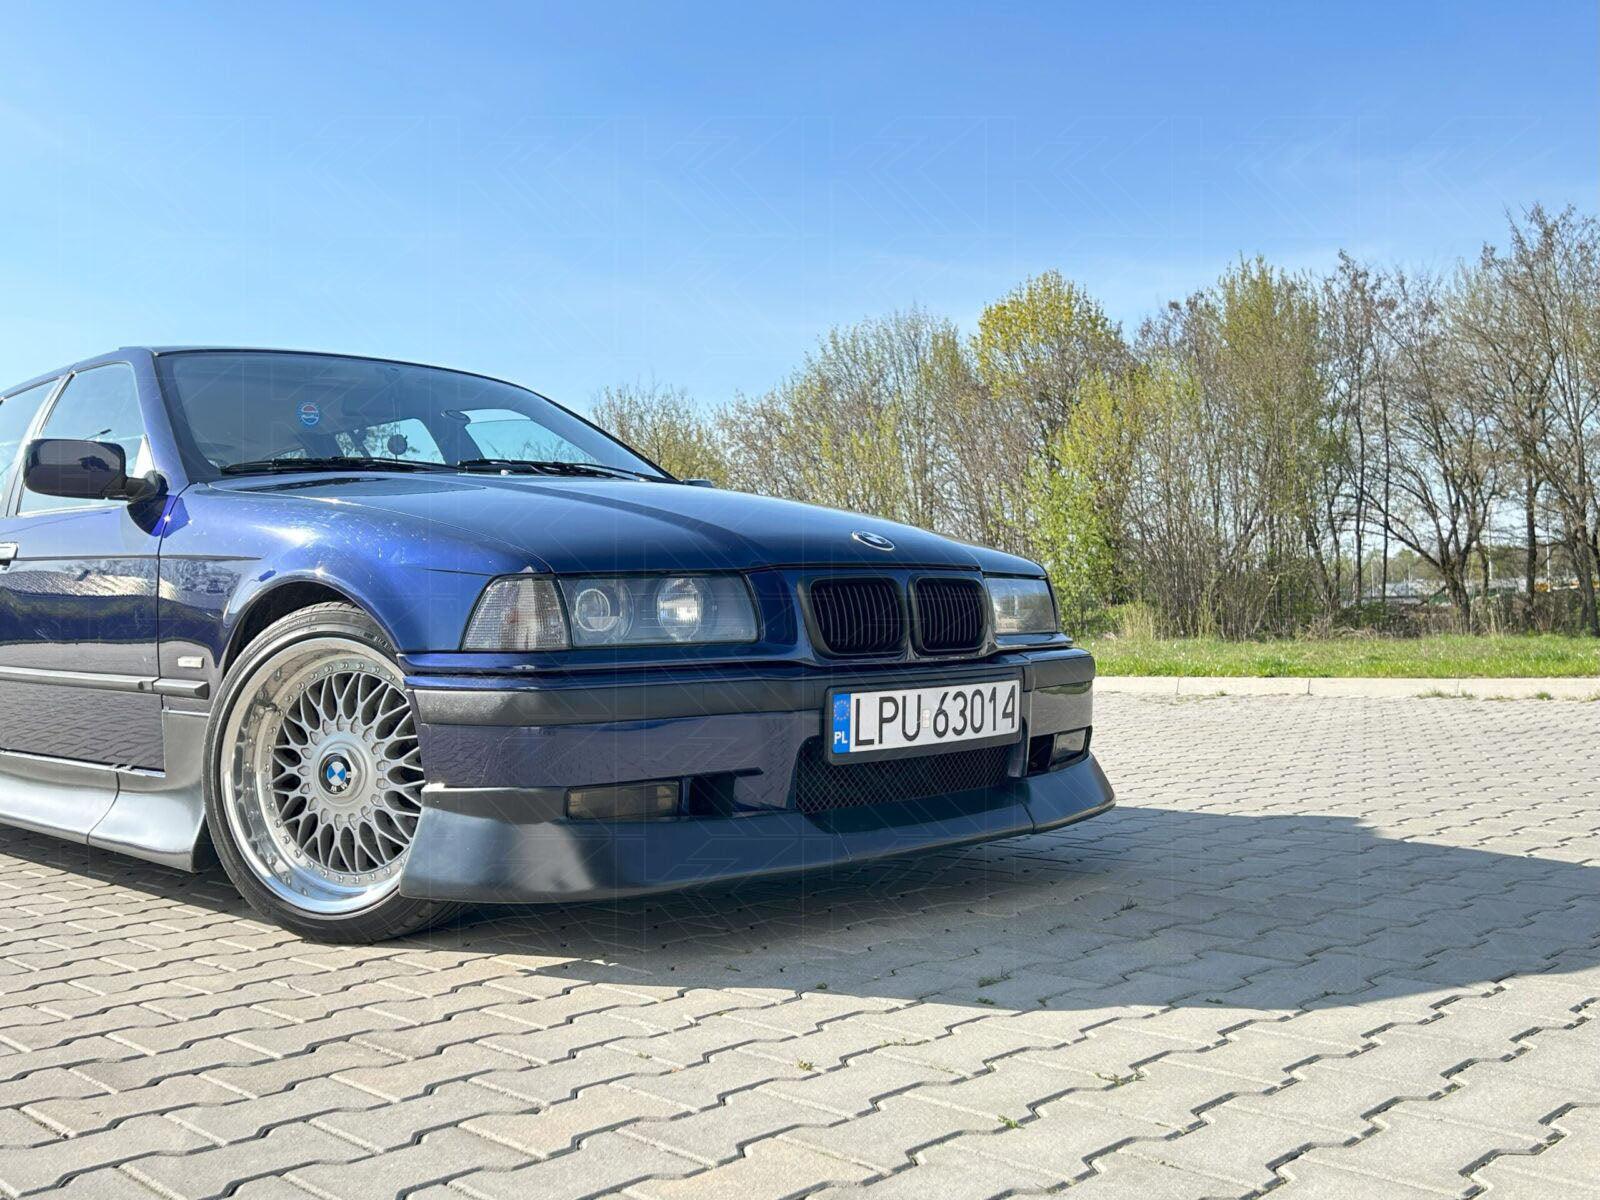 BMW 3-Series E36 Coupe Convertible - JDM Style Body Kit - ABS - K2 Industries